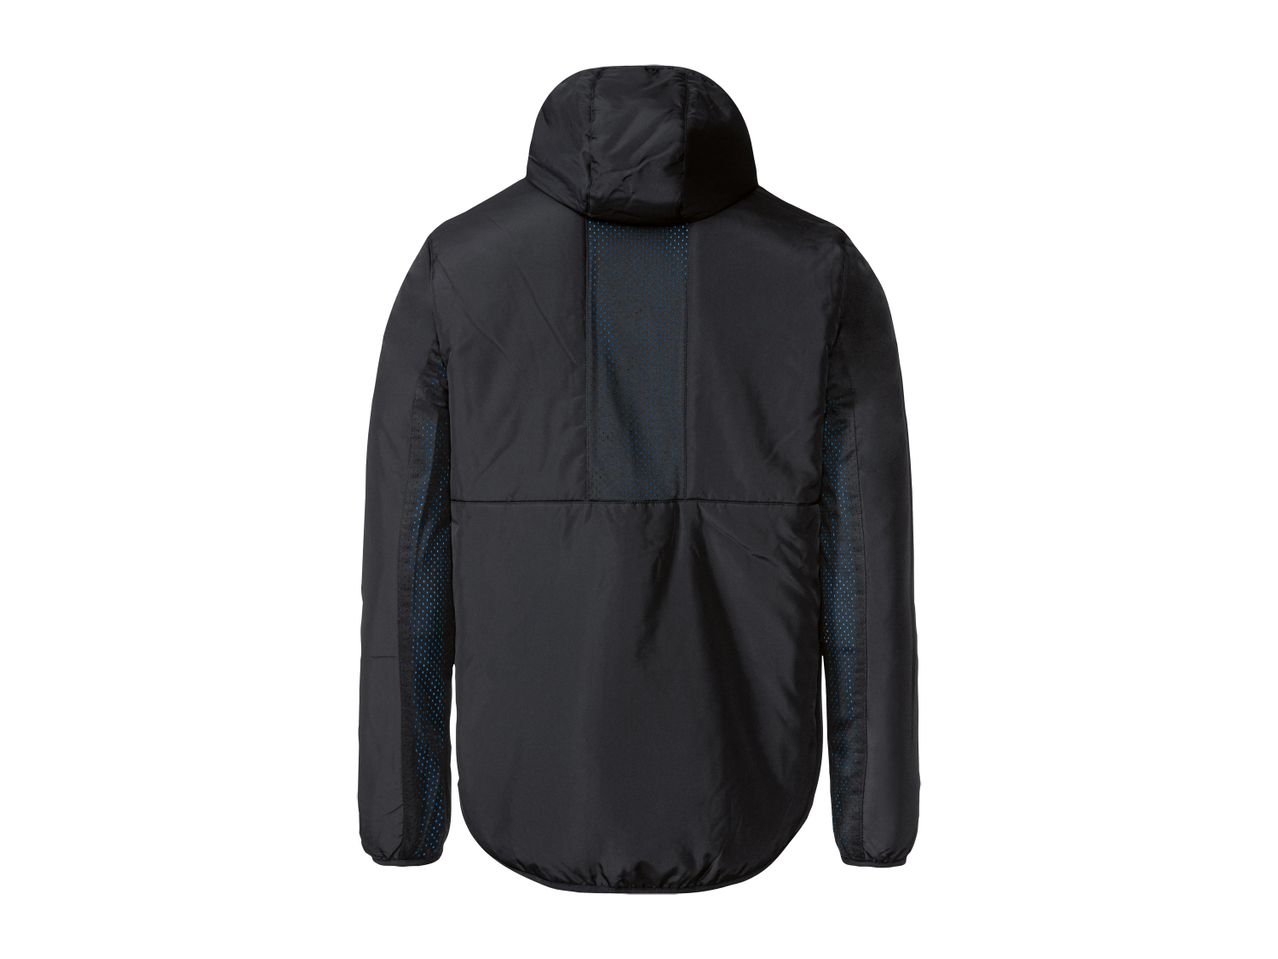 Go to full screen view: Crivit Men’s Reversible Cycling Jacket - Image 4